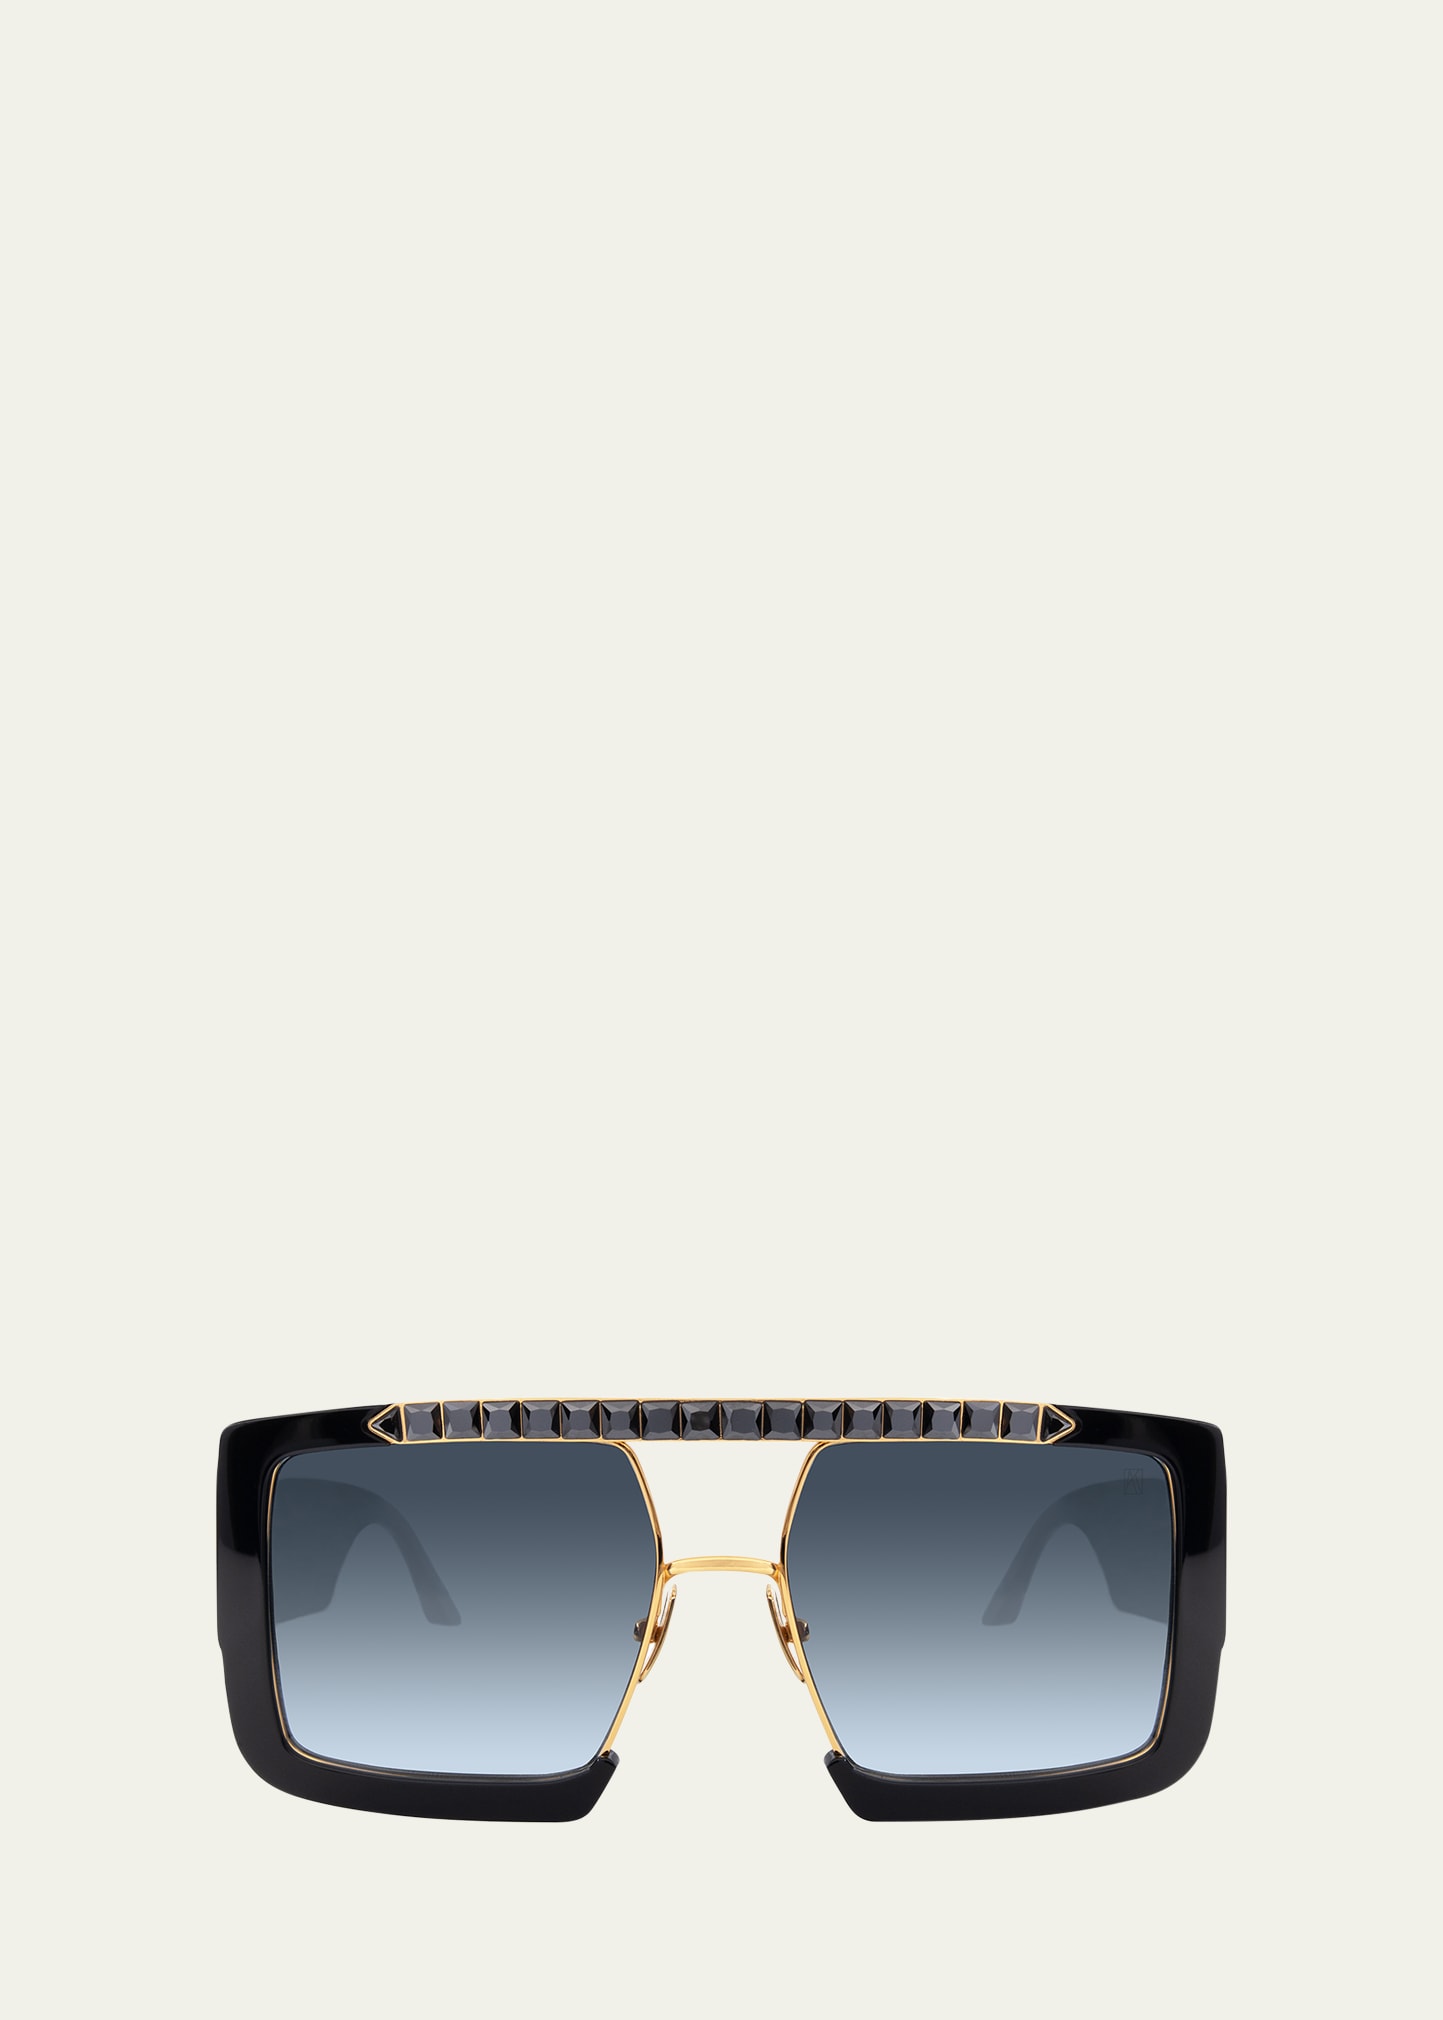 Anna-karin Karlsson Le Swag Stainless Steel Square-shaped Aviator Sunglasses In Black Black Cryst